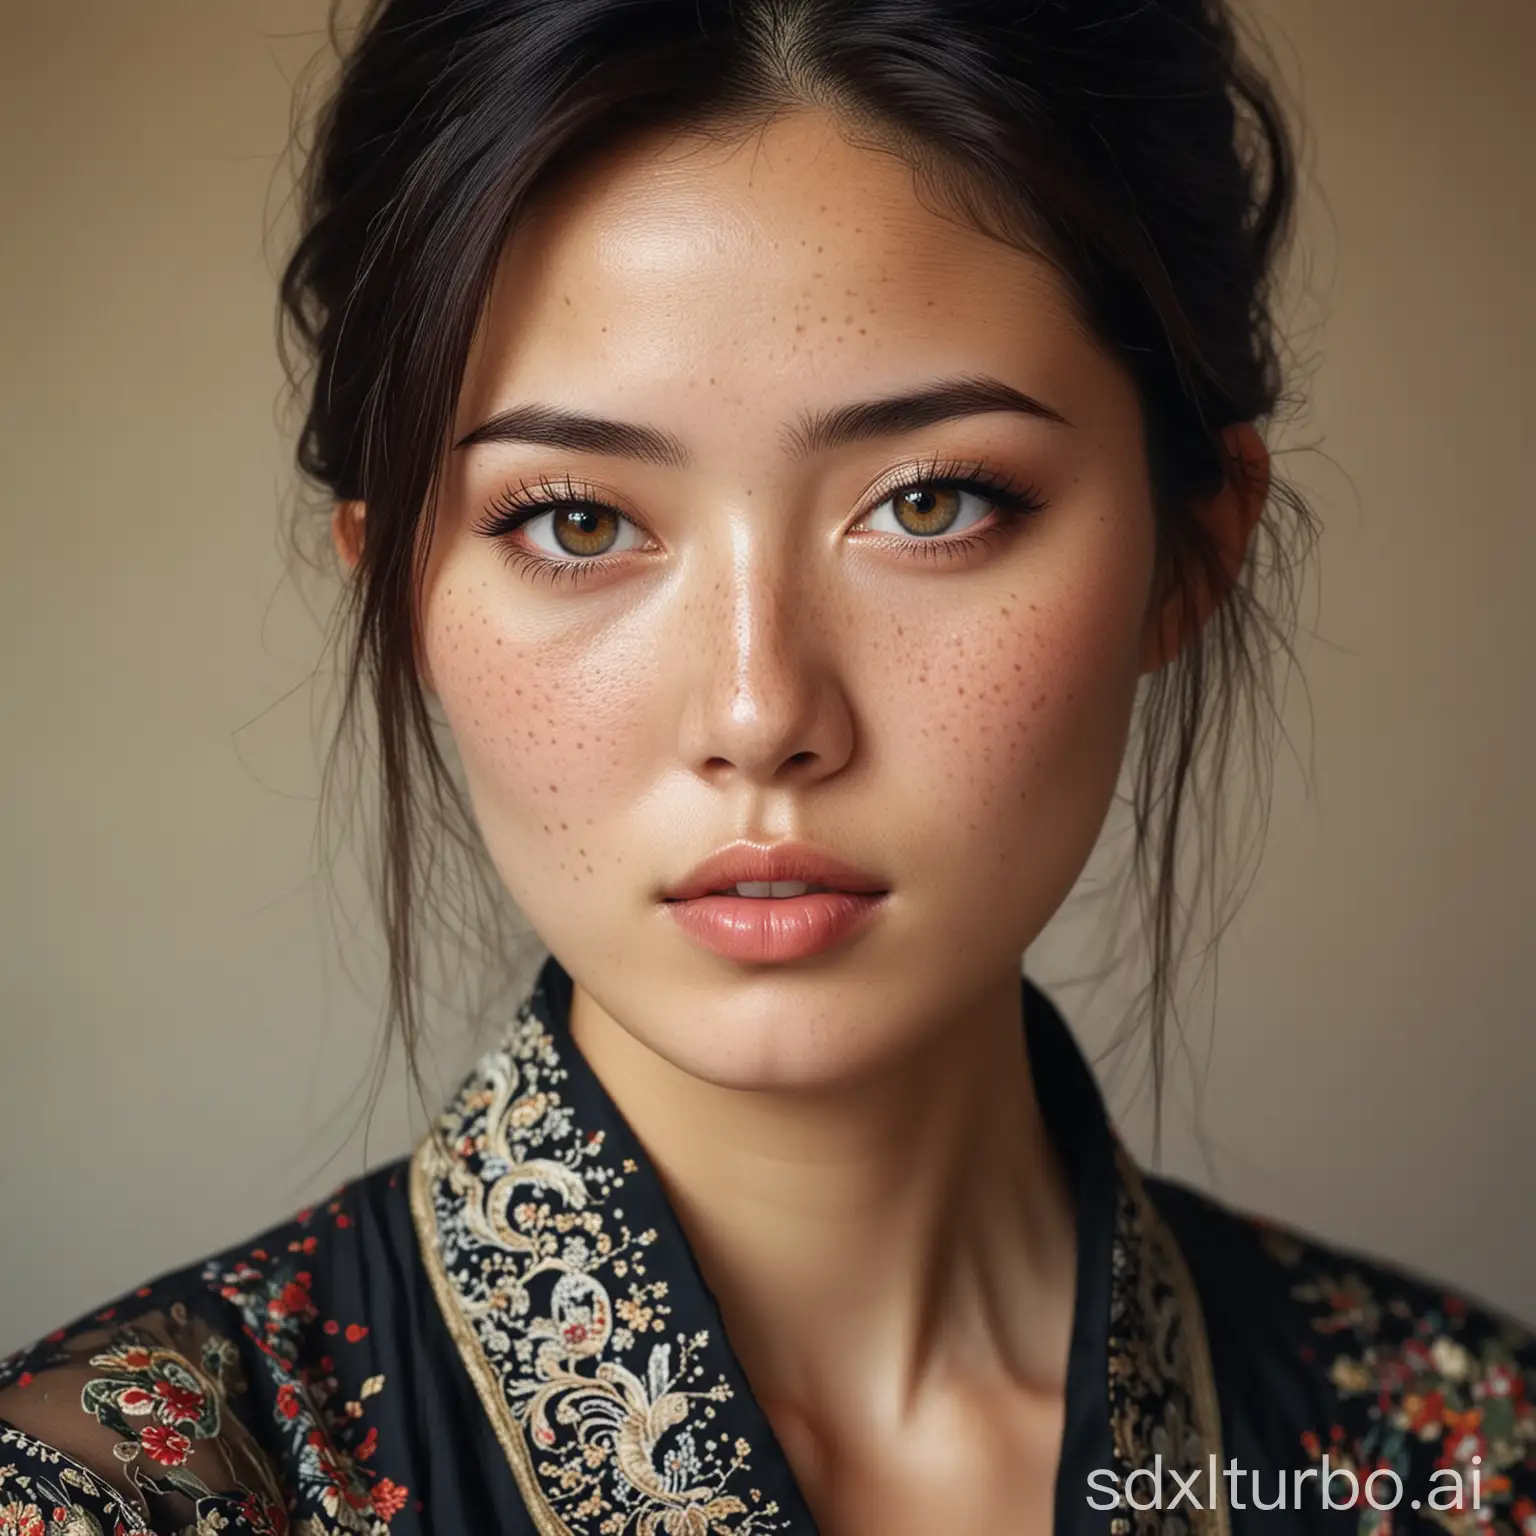 Elegant-Oriental-Woman-with-Freckles-in-Fashionable-Attire